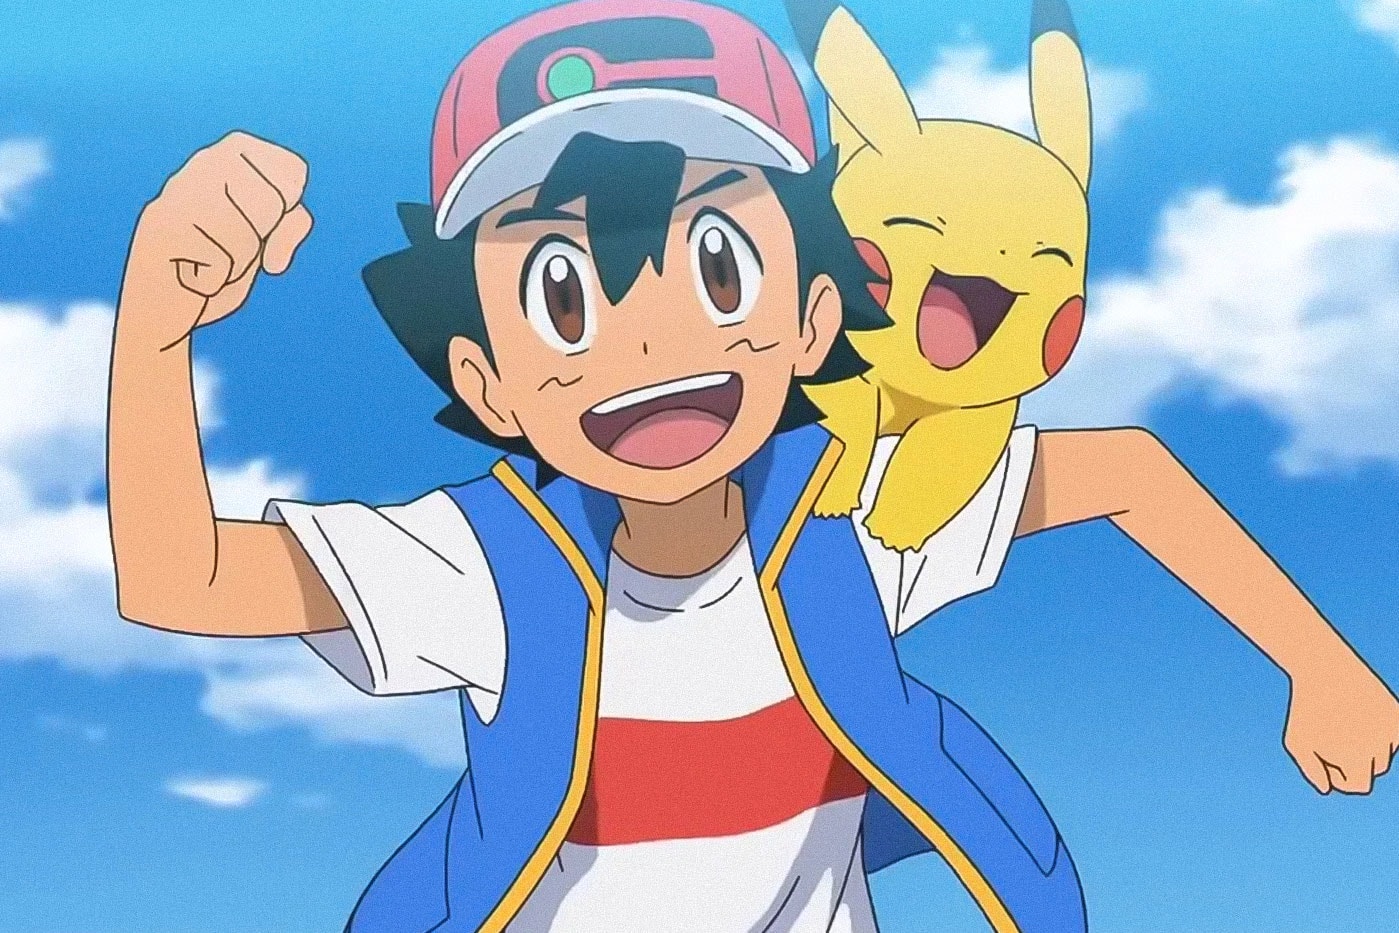 Ash Ketchum's Journey Finally Ending with New Pokemon Anime Series